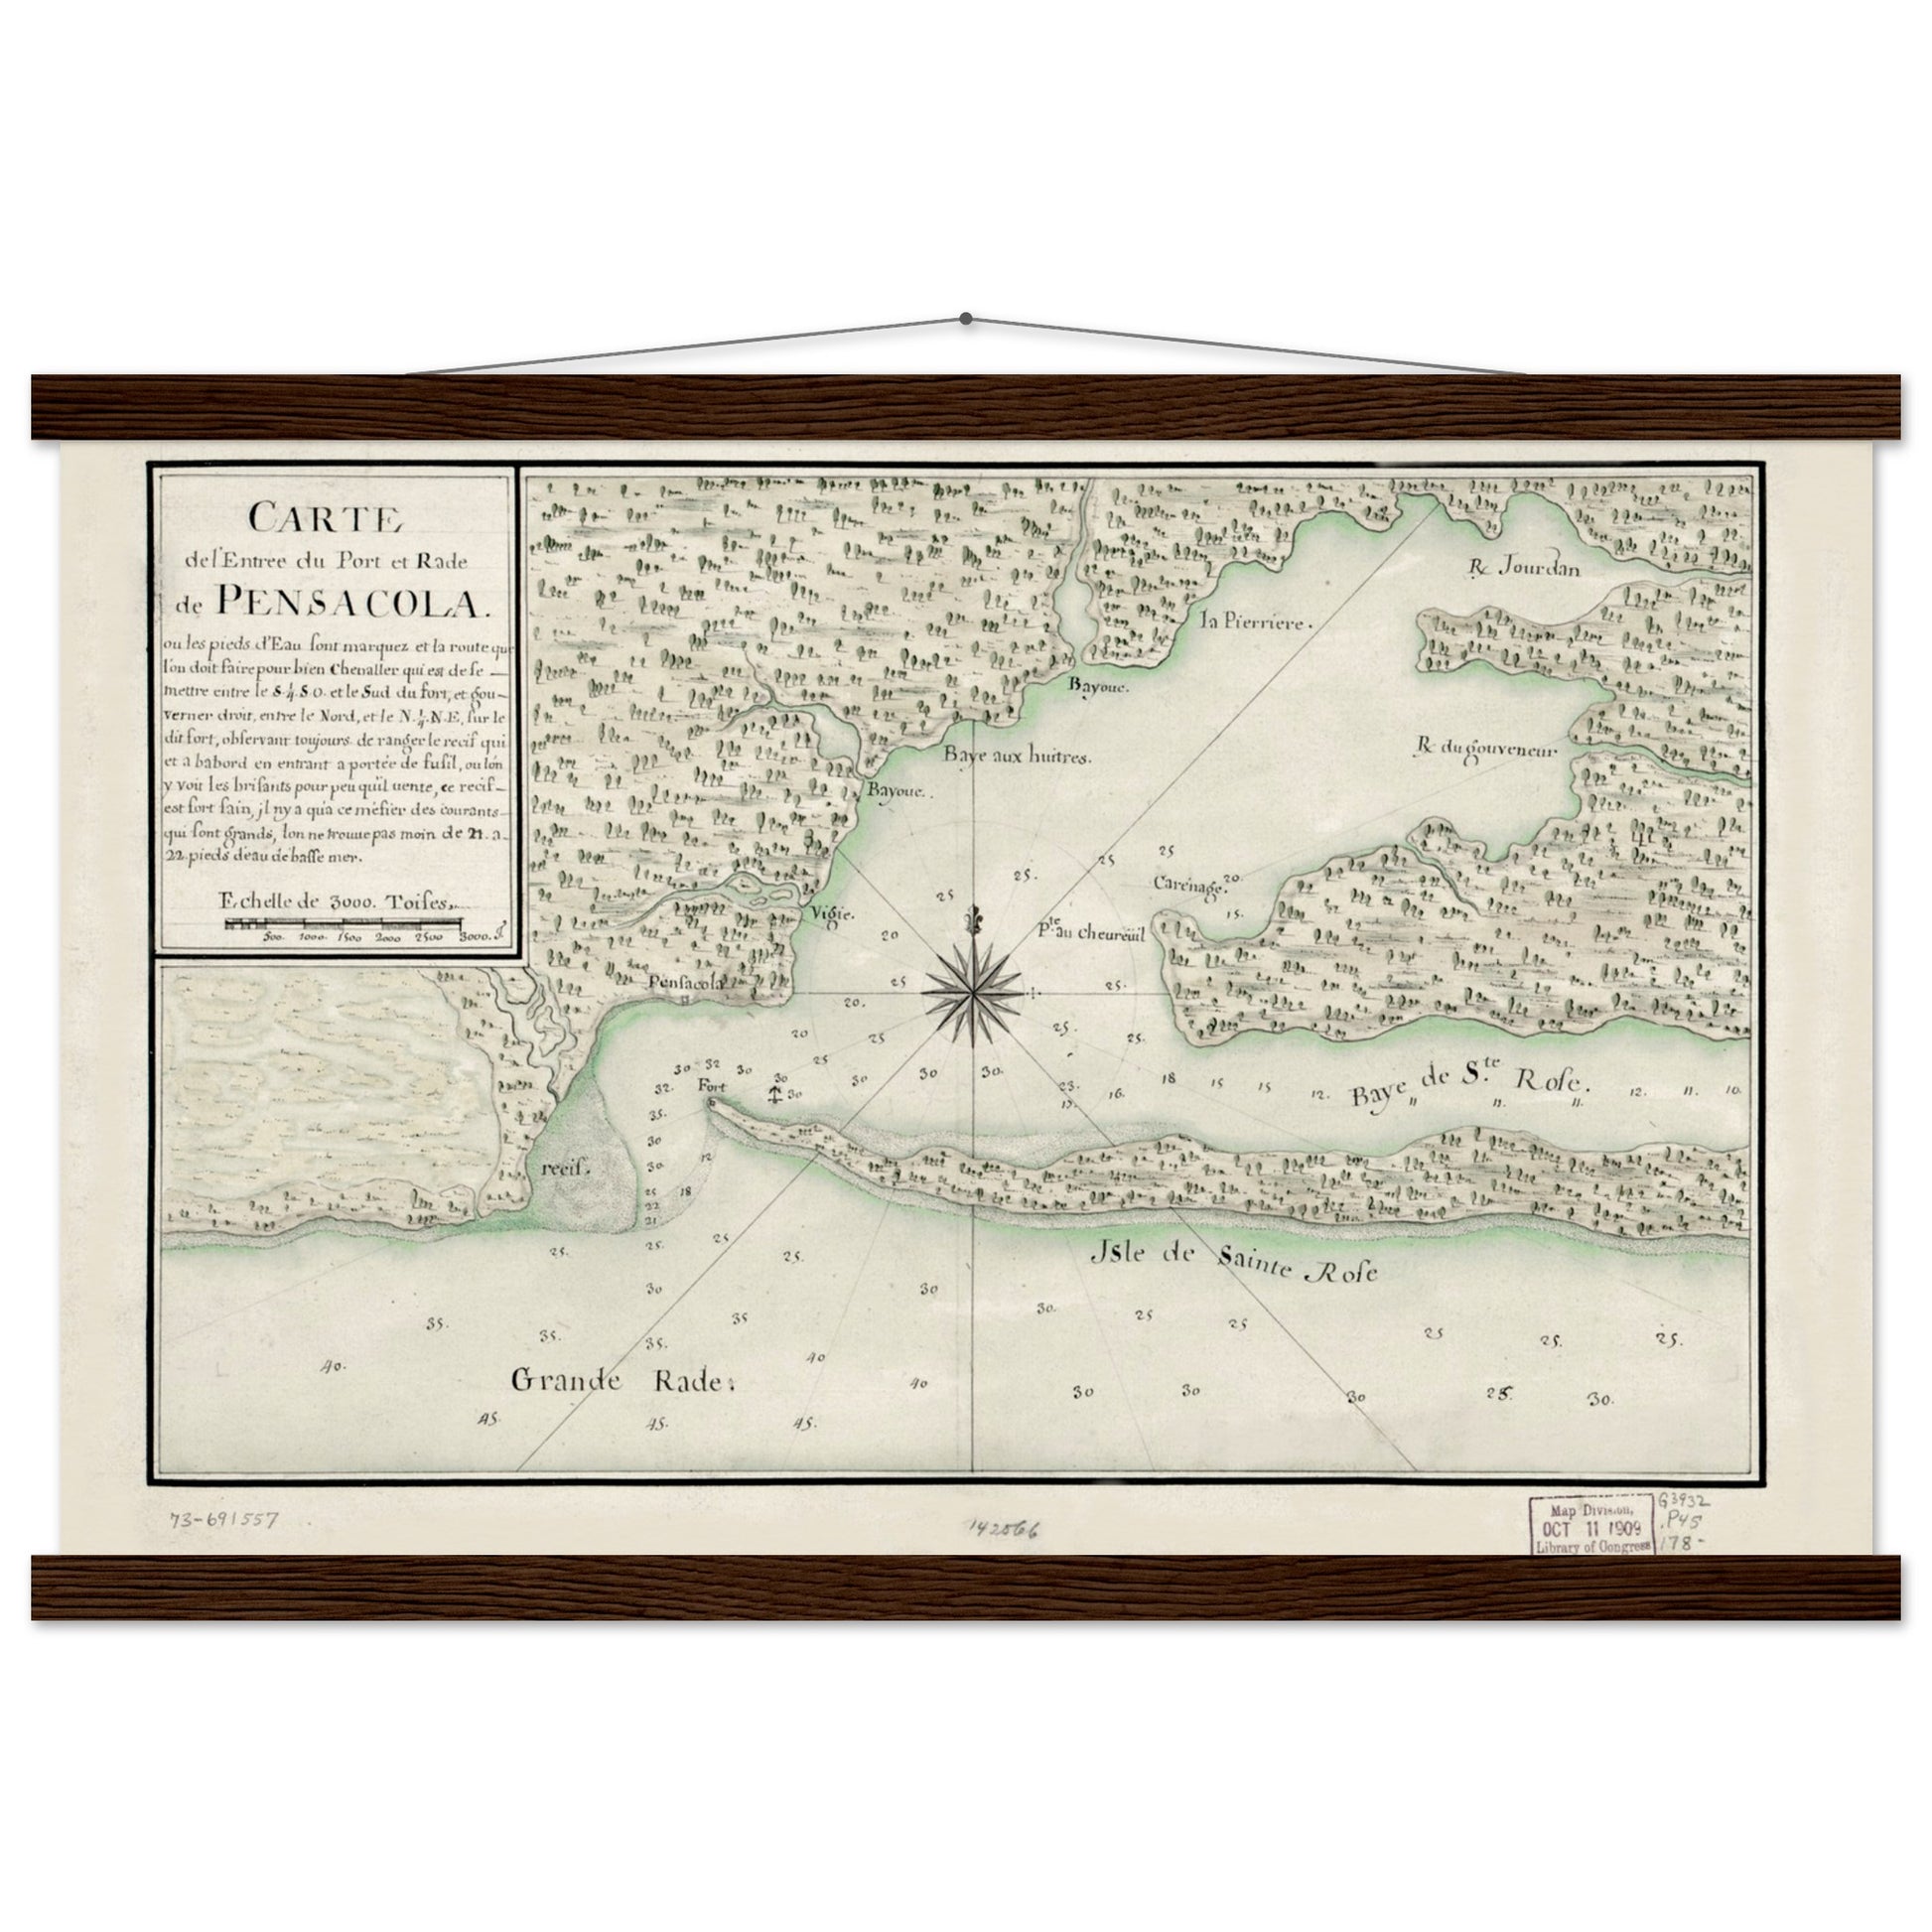 French nautical chart of Pensacola Bay from sometime in the 1780s